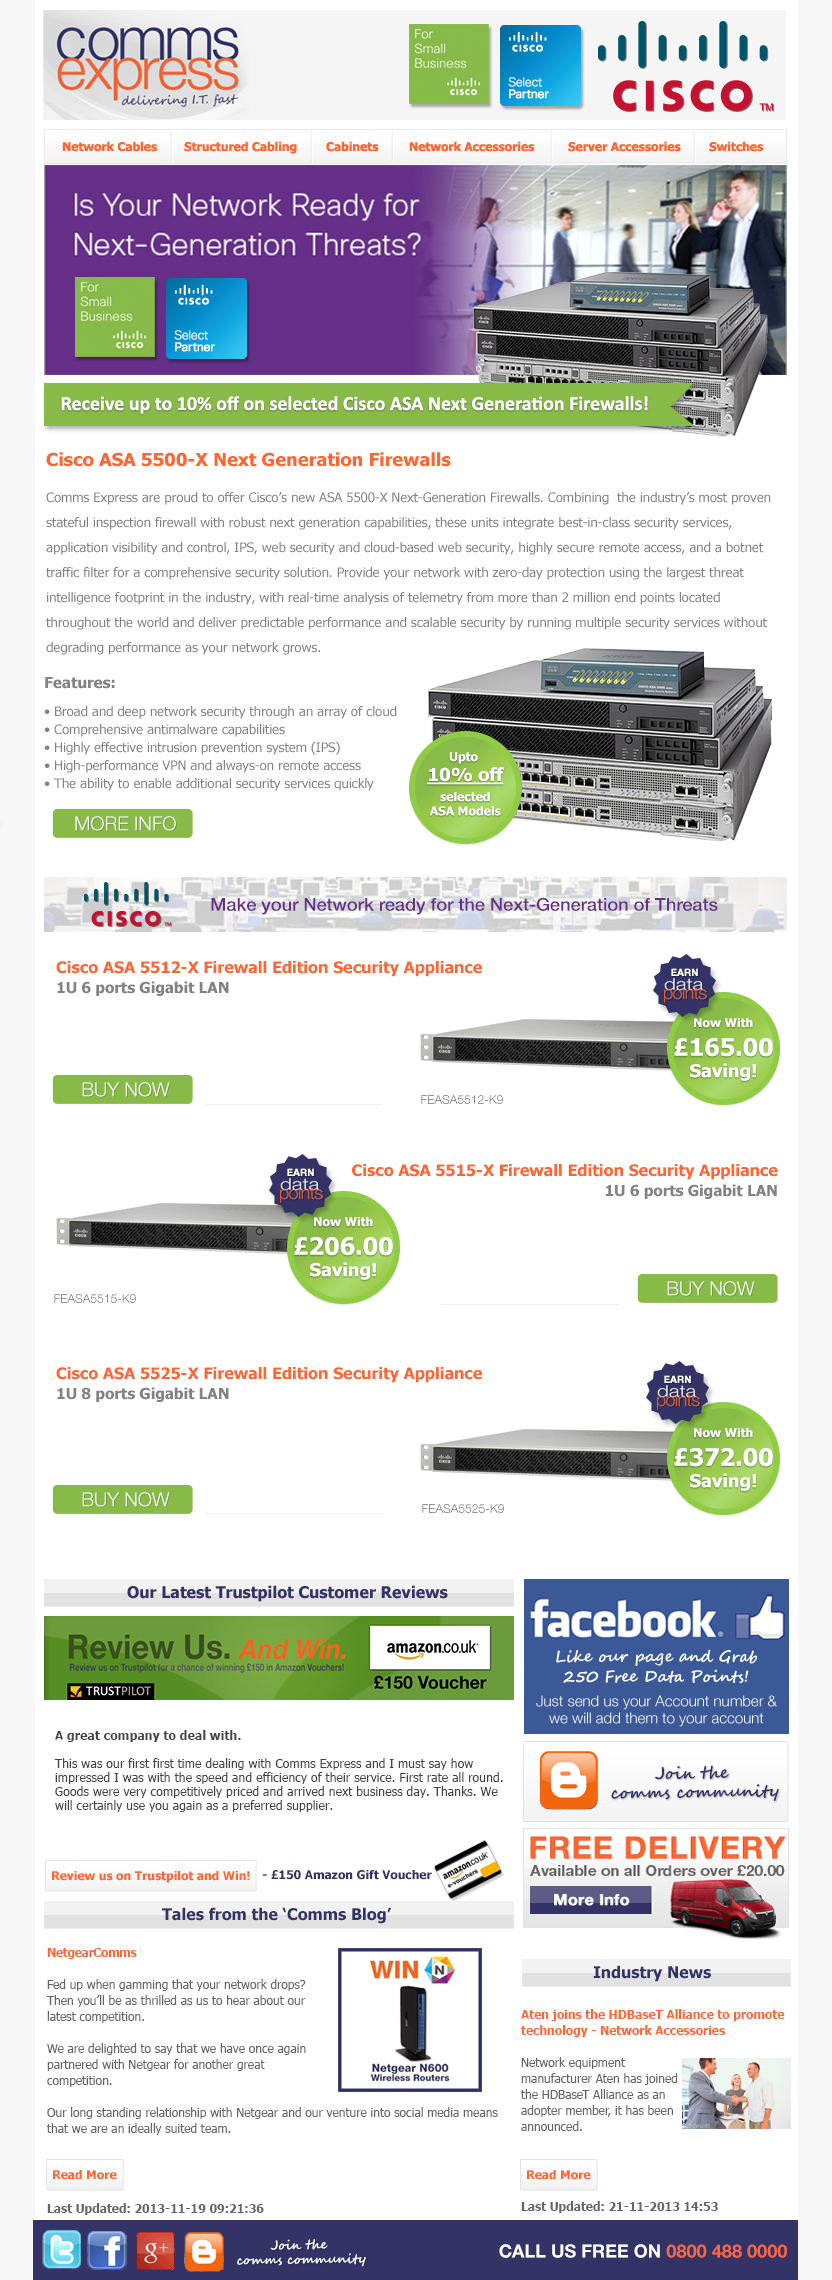 Receive up to 10% off on selected Cisco ASA Next Genera